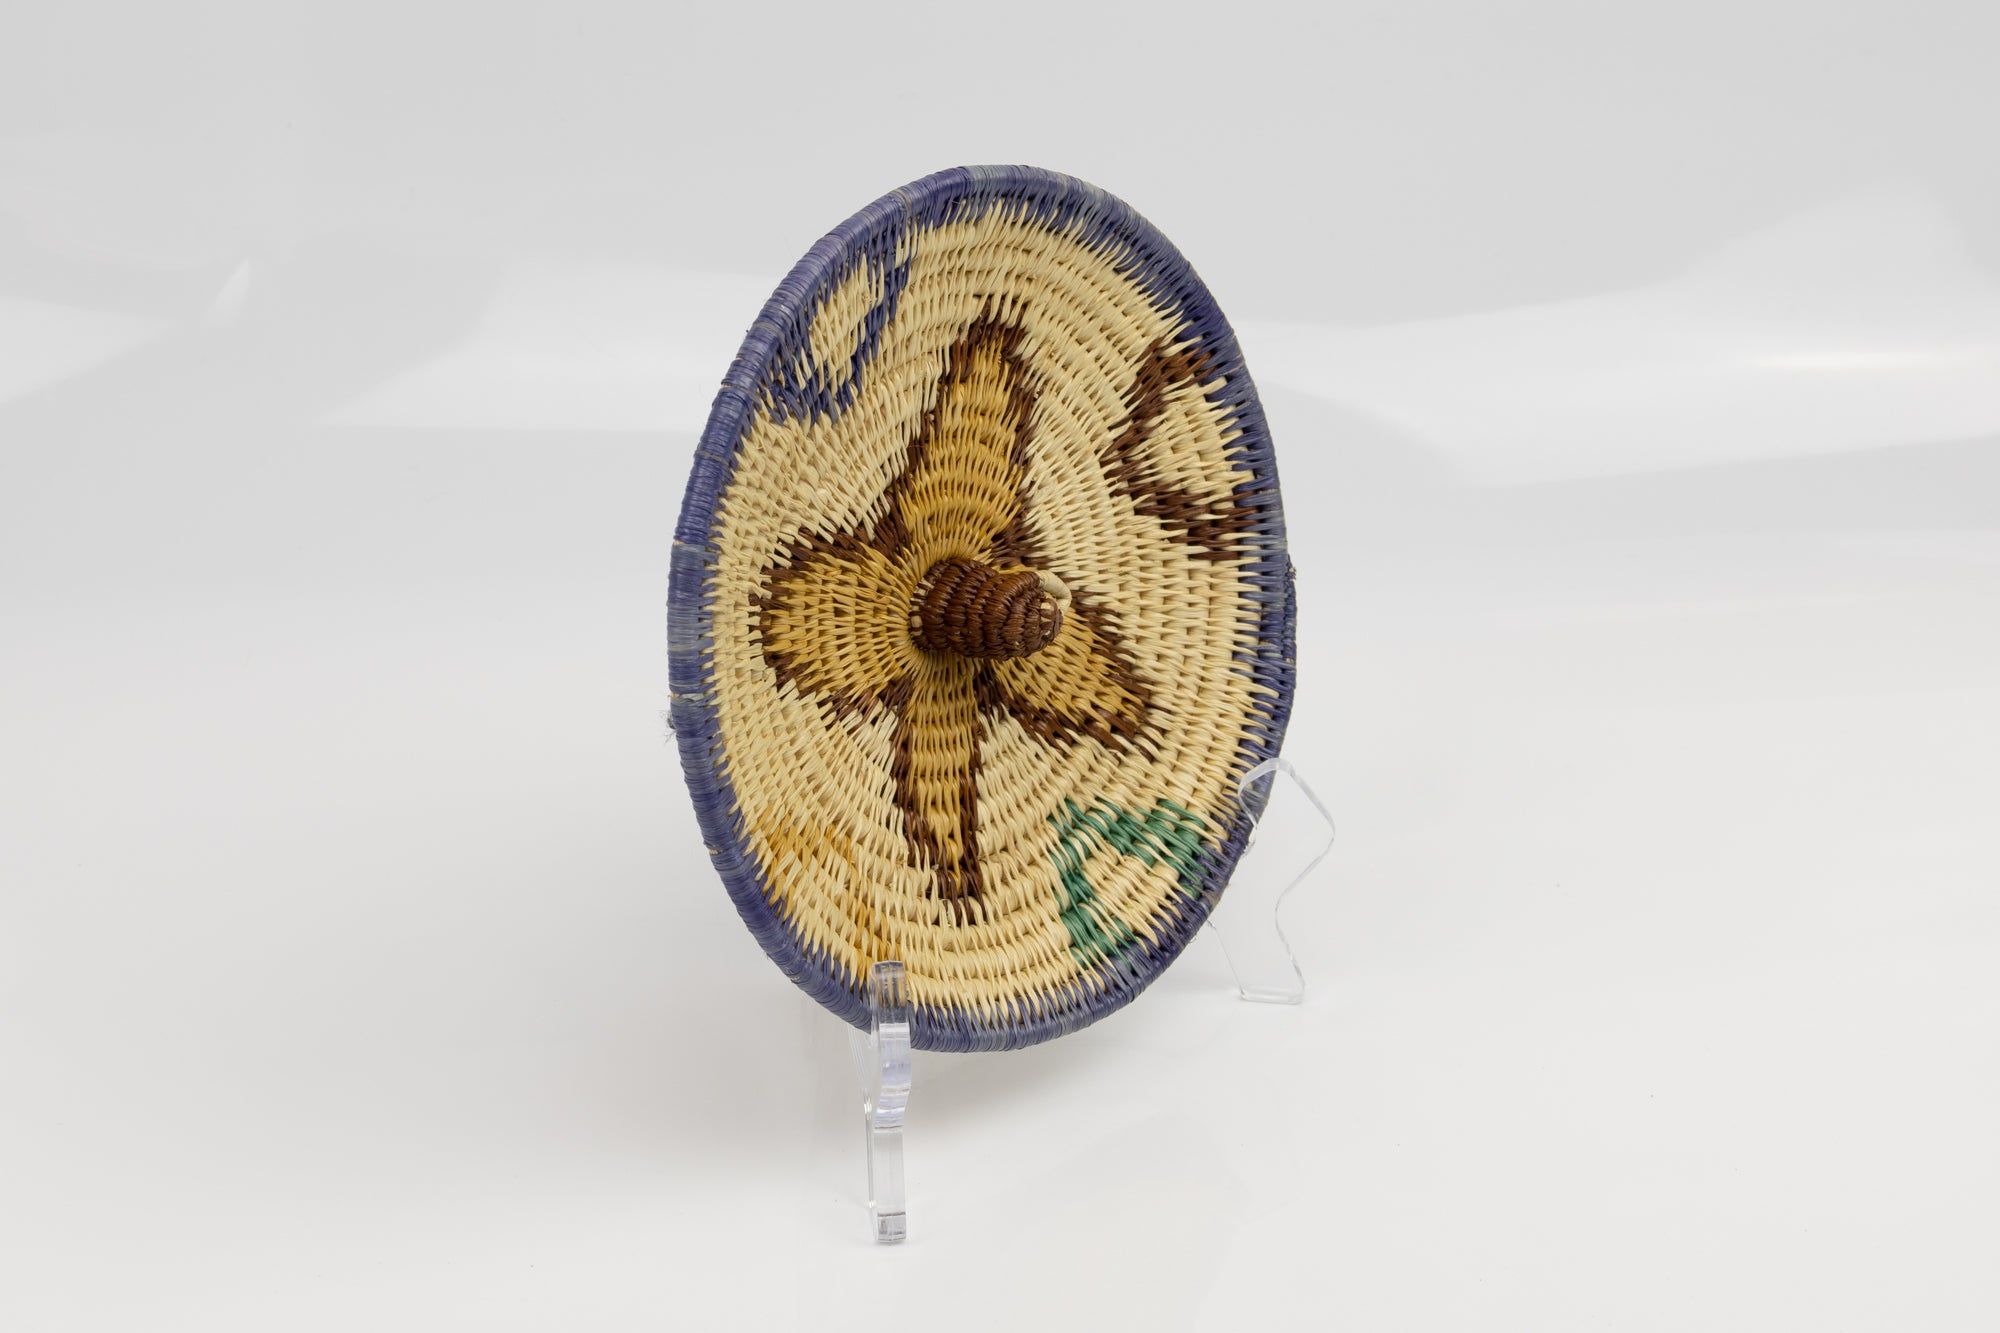 Hand woven plate basket from Panama. Blue, brown, gold and white colors. Wall decoration. Bird head. Indigenous artists Panama.